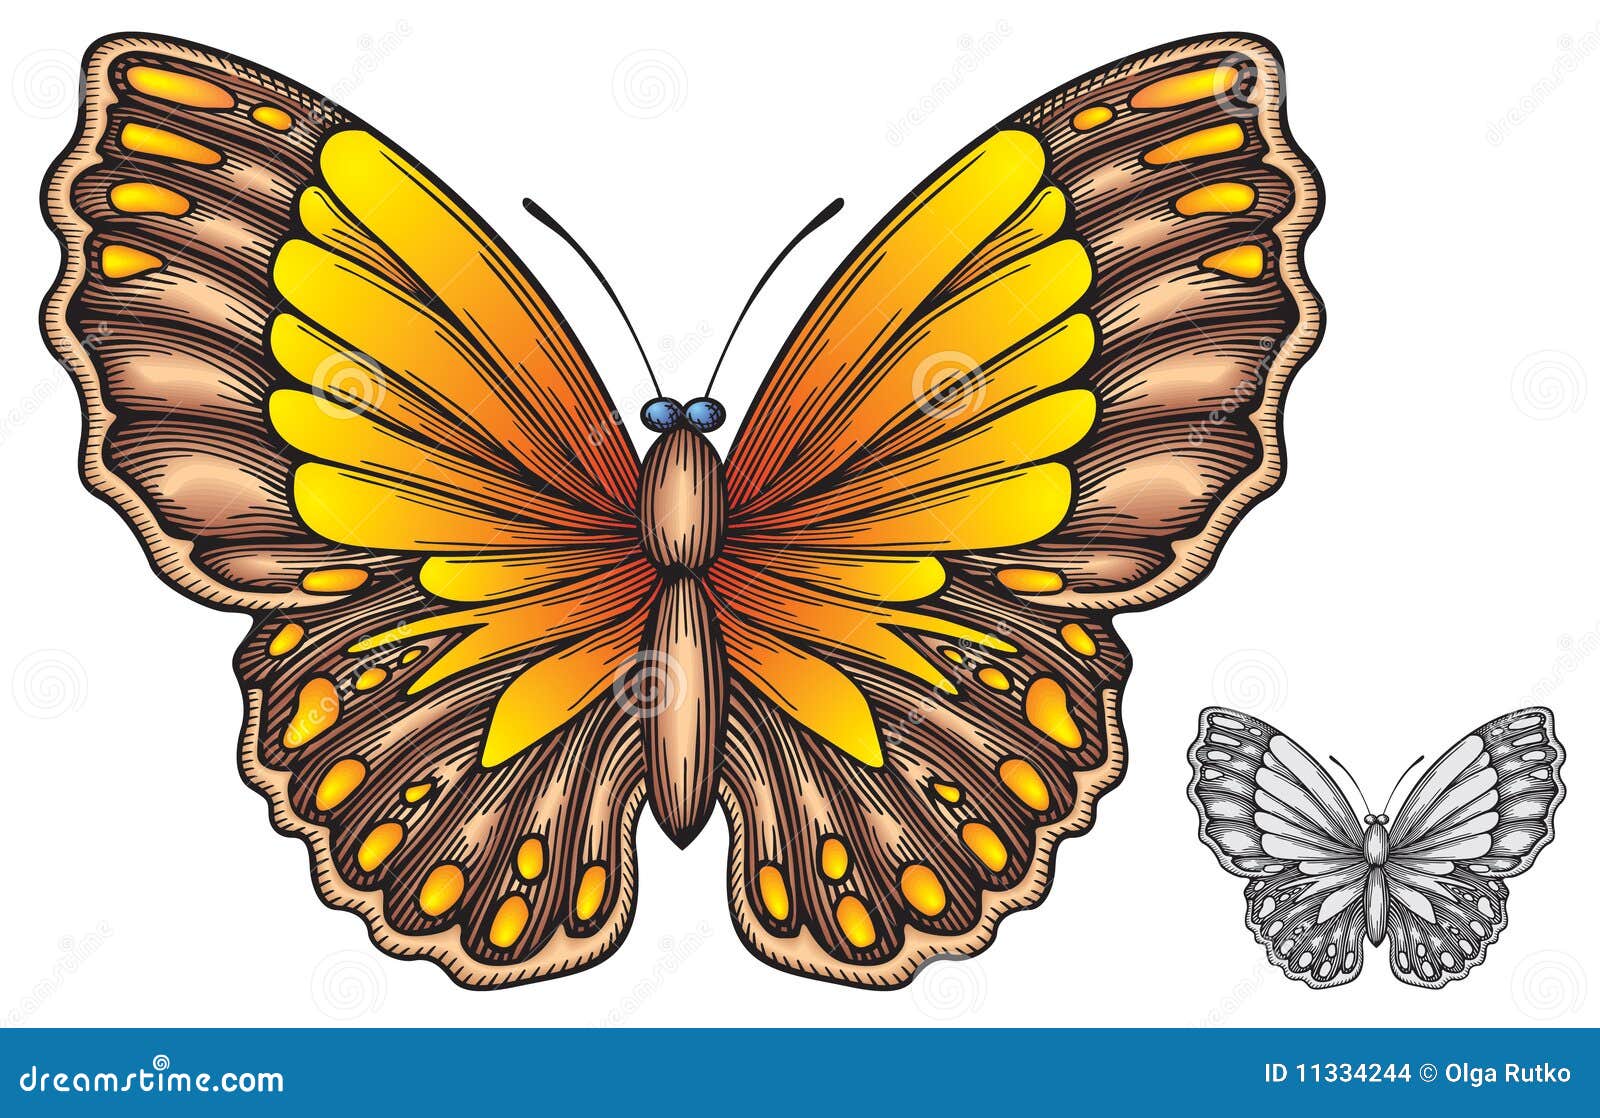 Download Butterfly stock vector. Illustration of silhouette, view ...